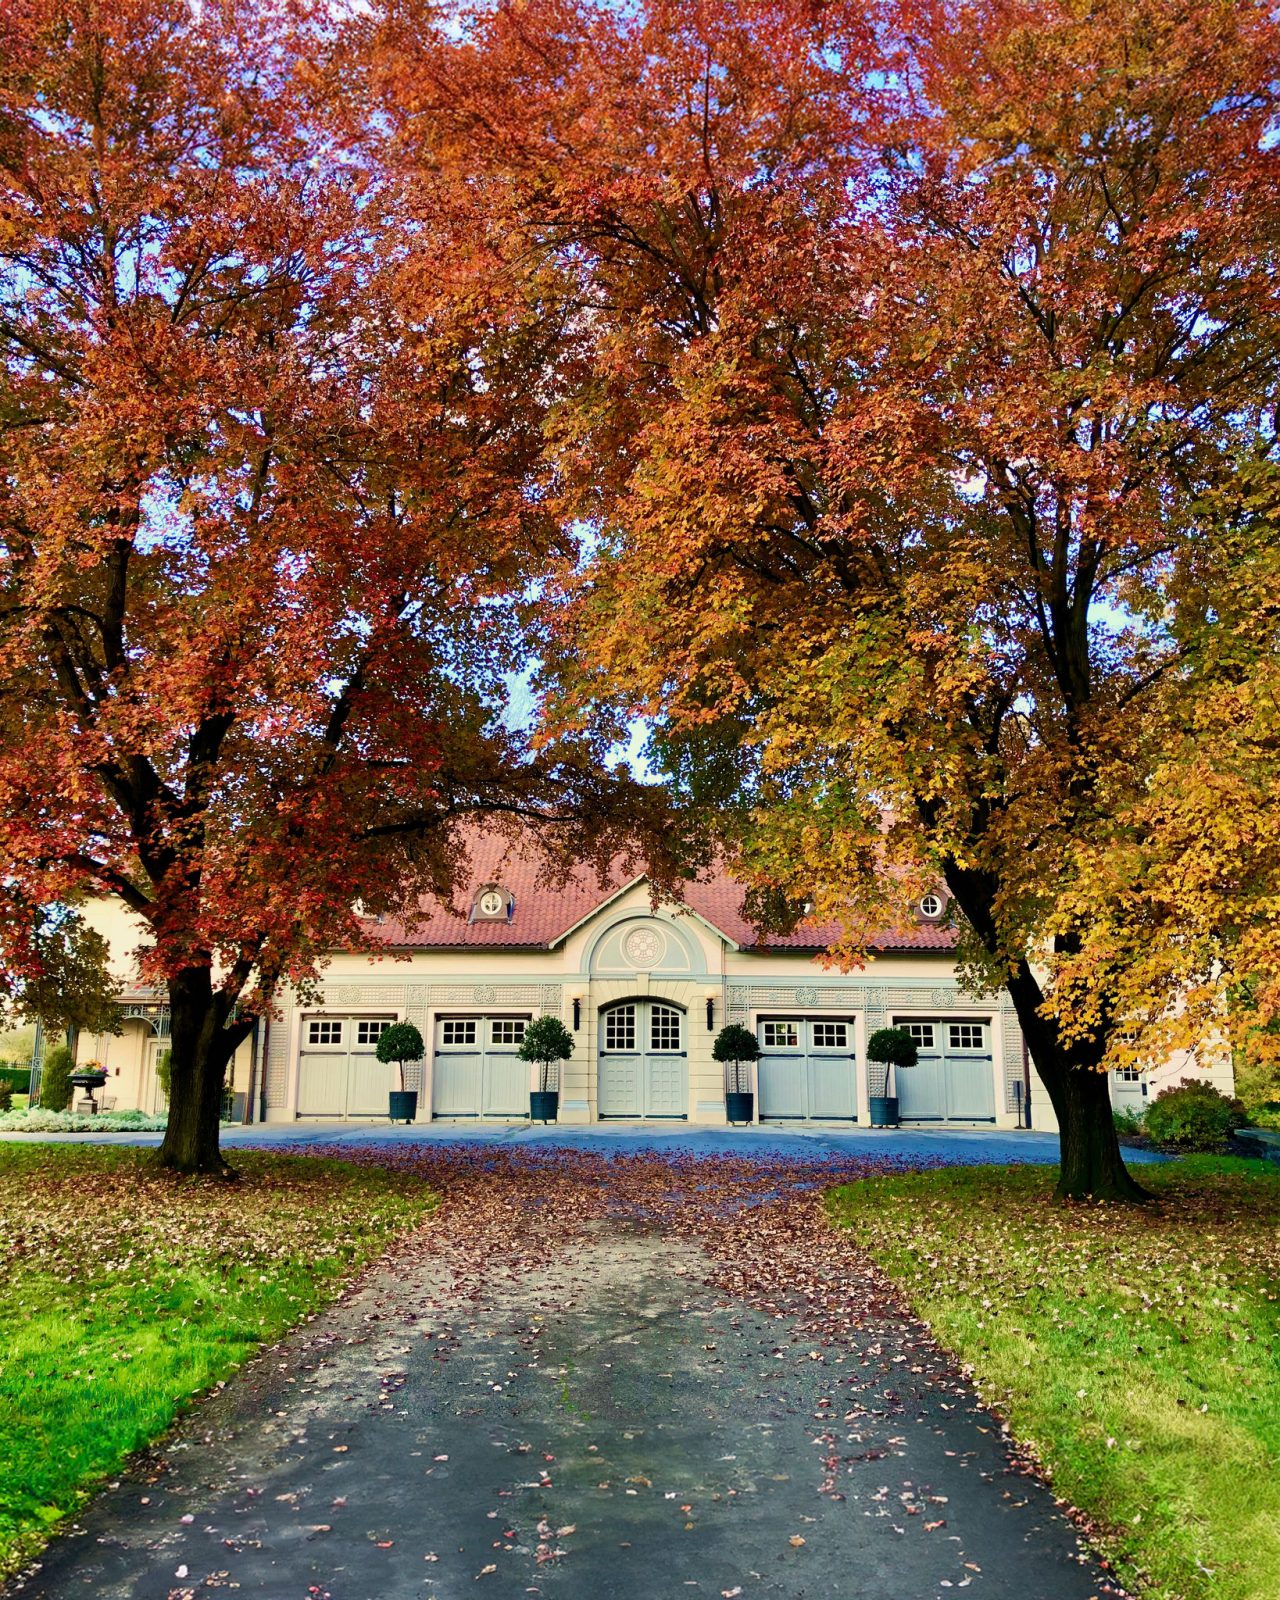 Trees with beautiful fall leaves line the paved road that leads to the Chauffeur's Garage at Nemours Estate.